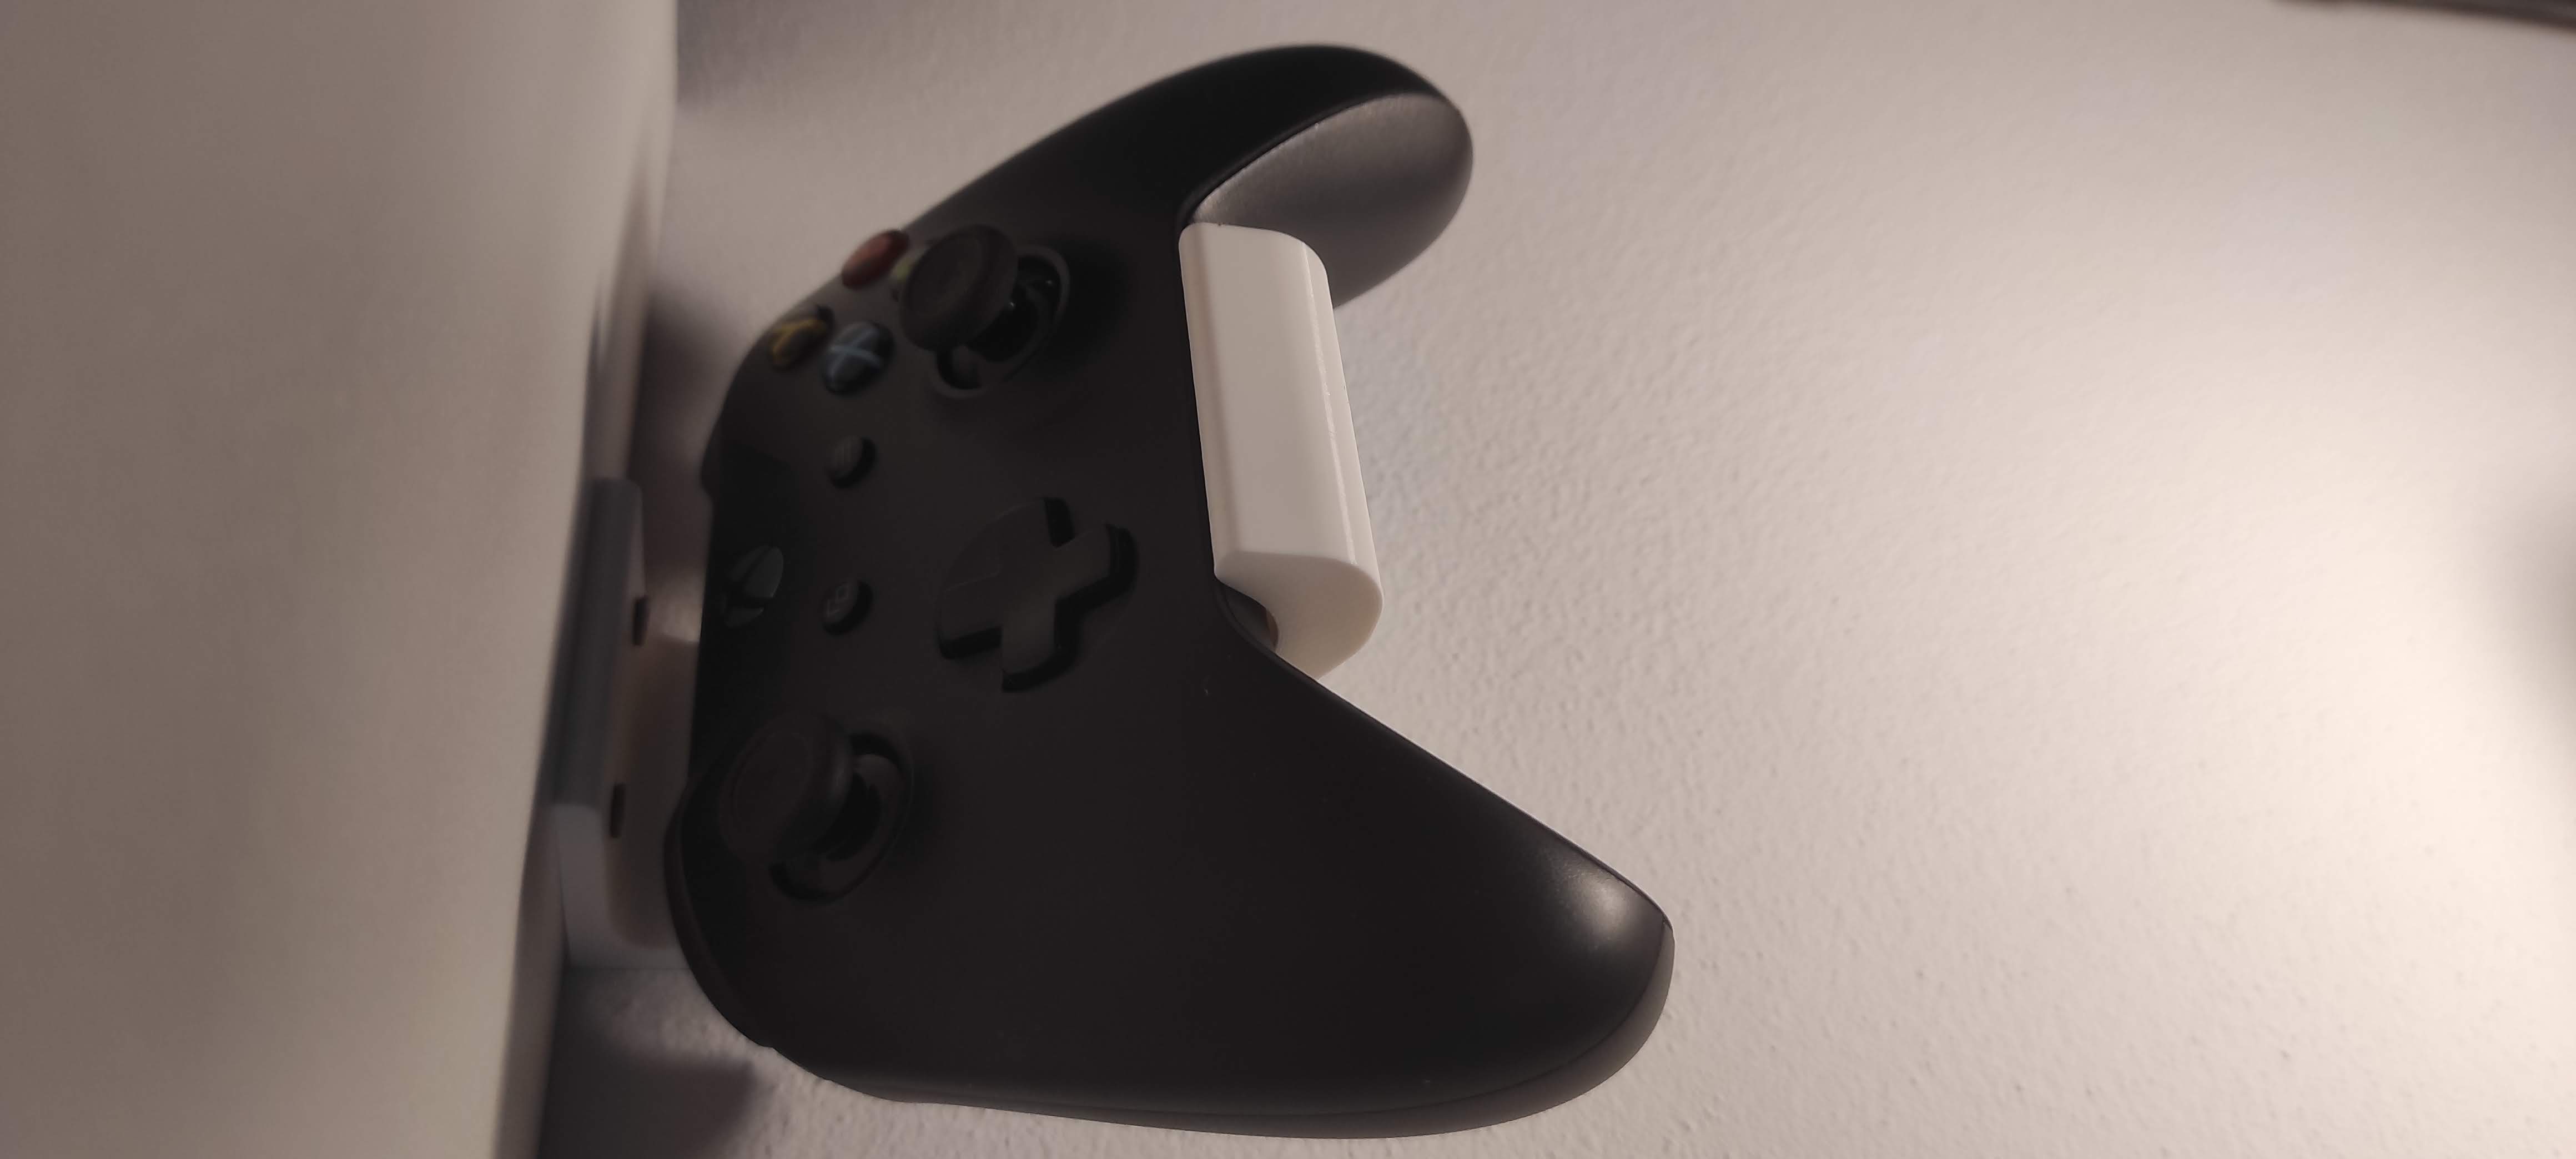 Stand a soffitto controller Xbox